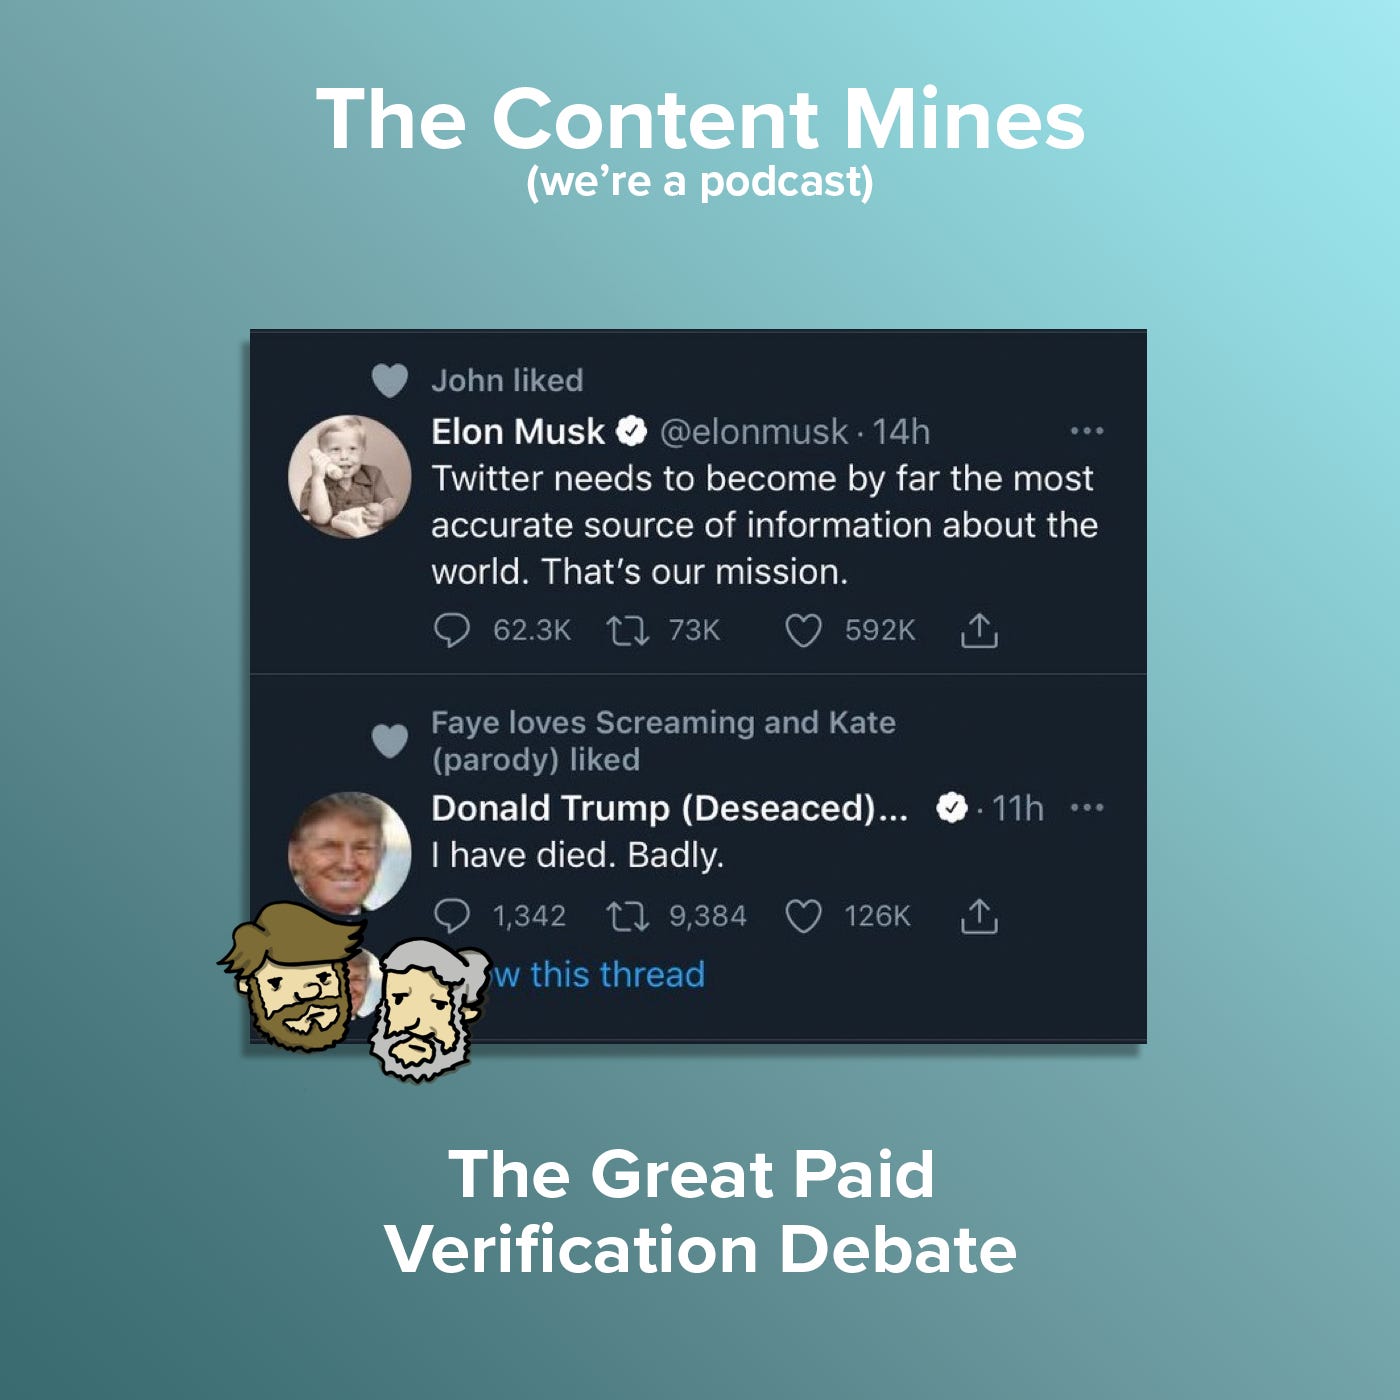 The Great Paid Verification Debate